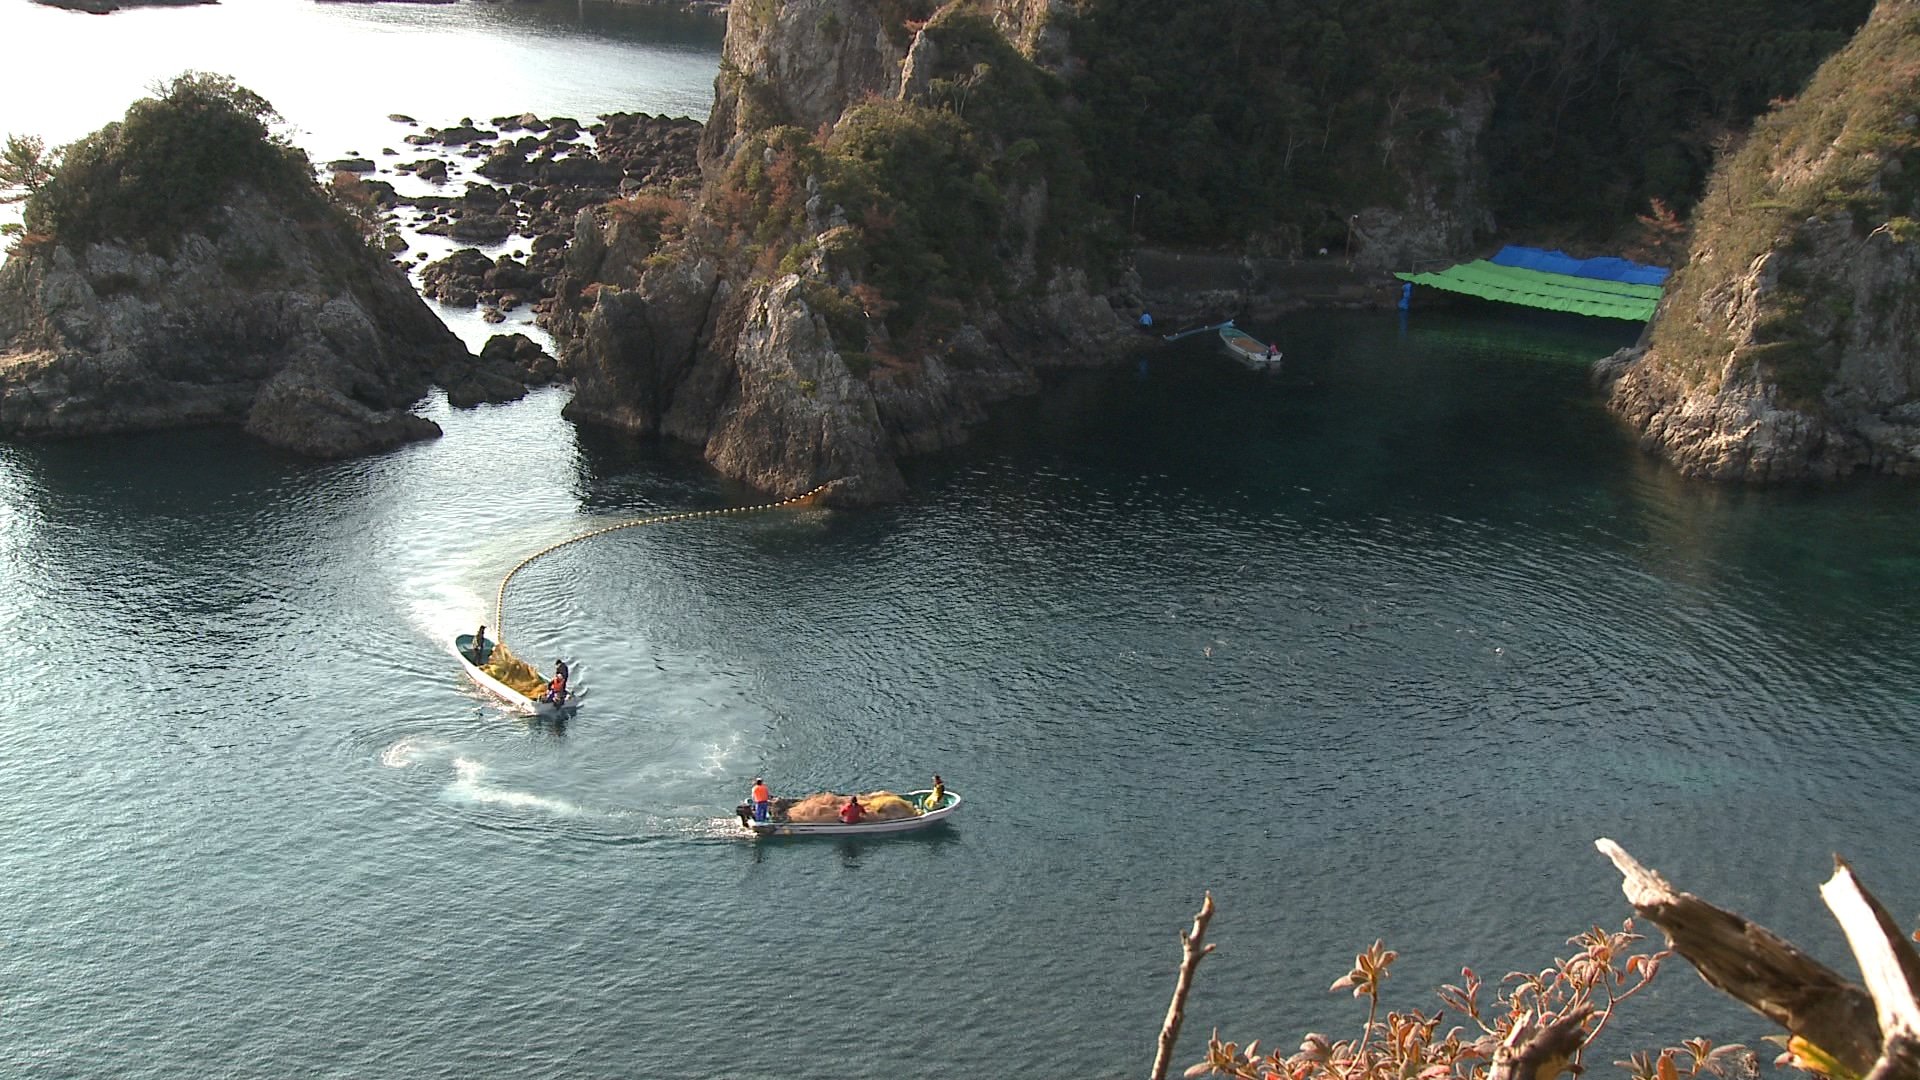 This is the cove in Taiji, Japan. Dolphins are herded into the area that is section off with tarpaulin